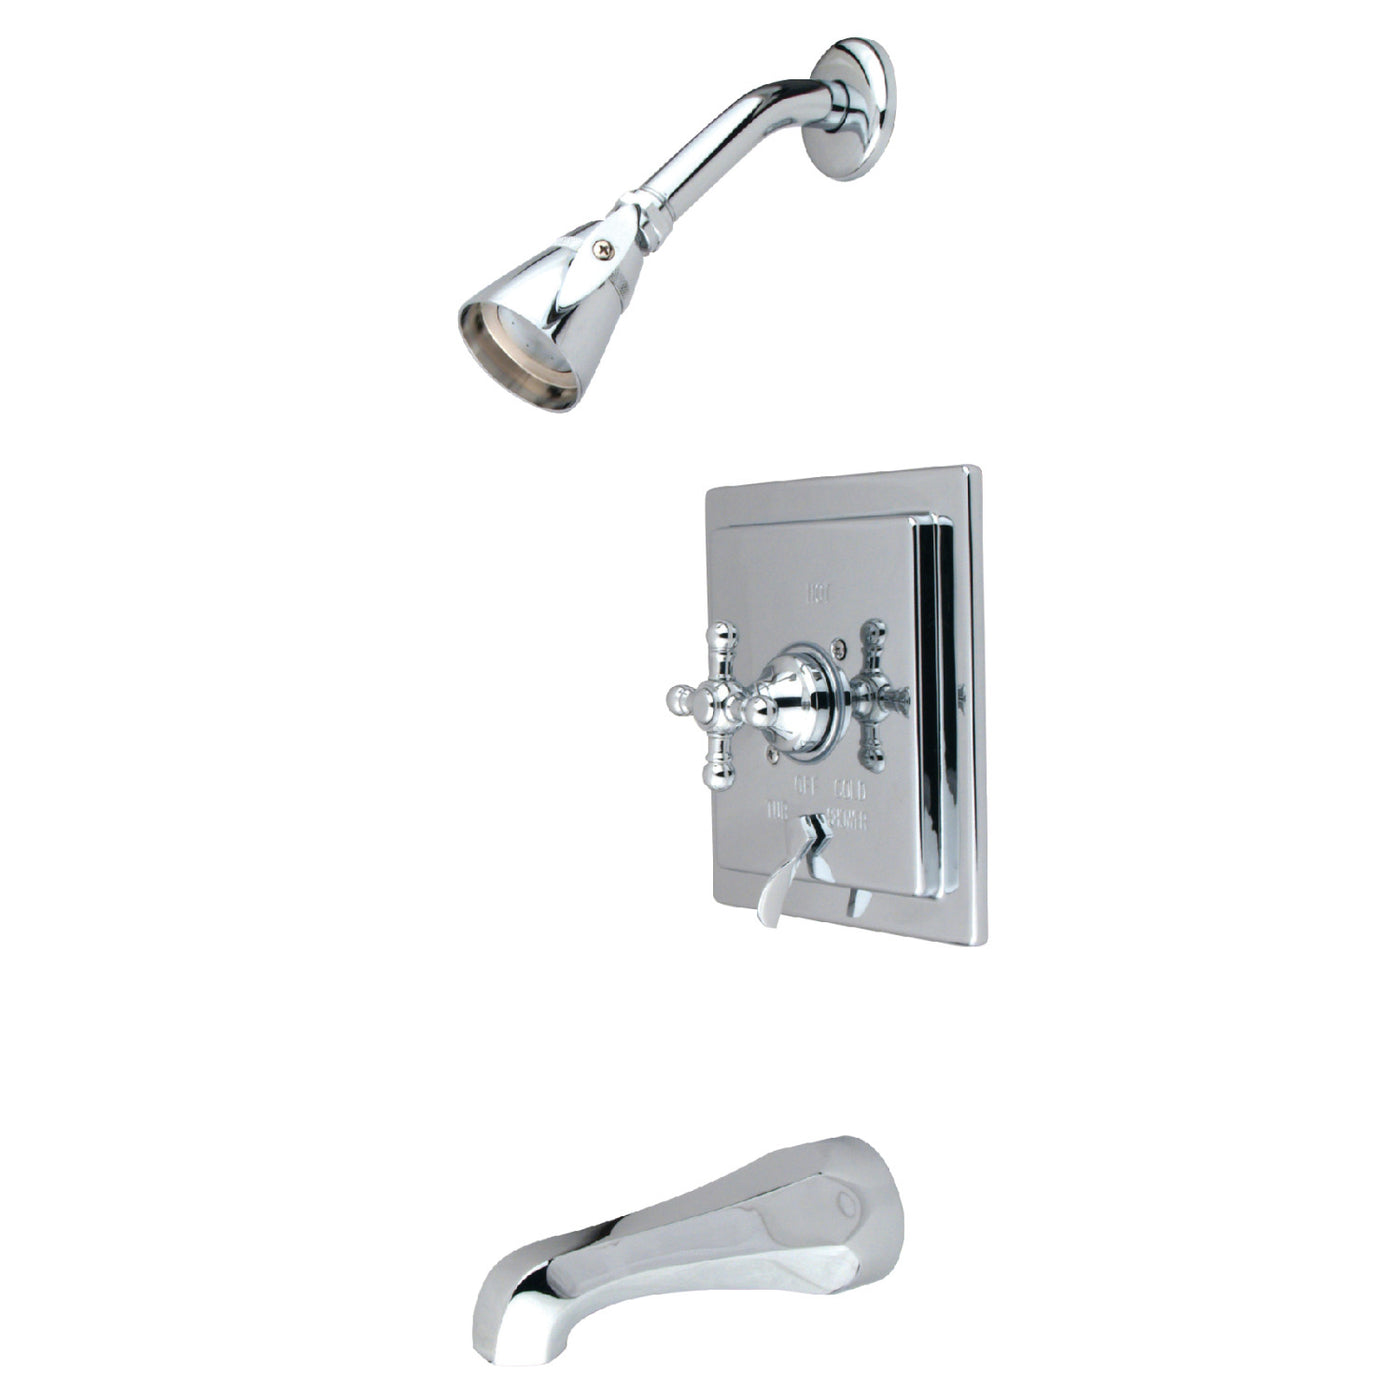 Elements of Design EB86514BX Tub and Shower Faucet with Diverter, Polished Chrome